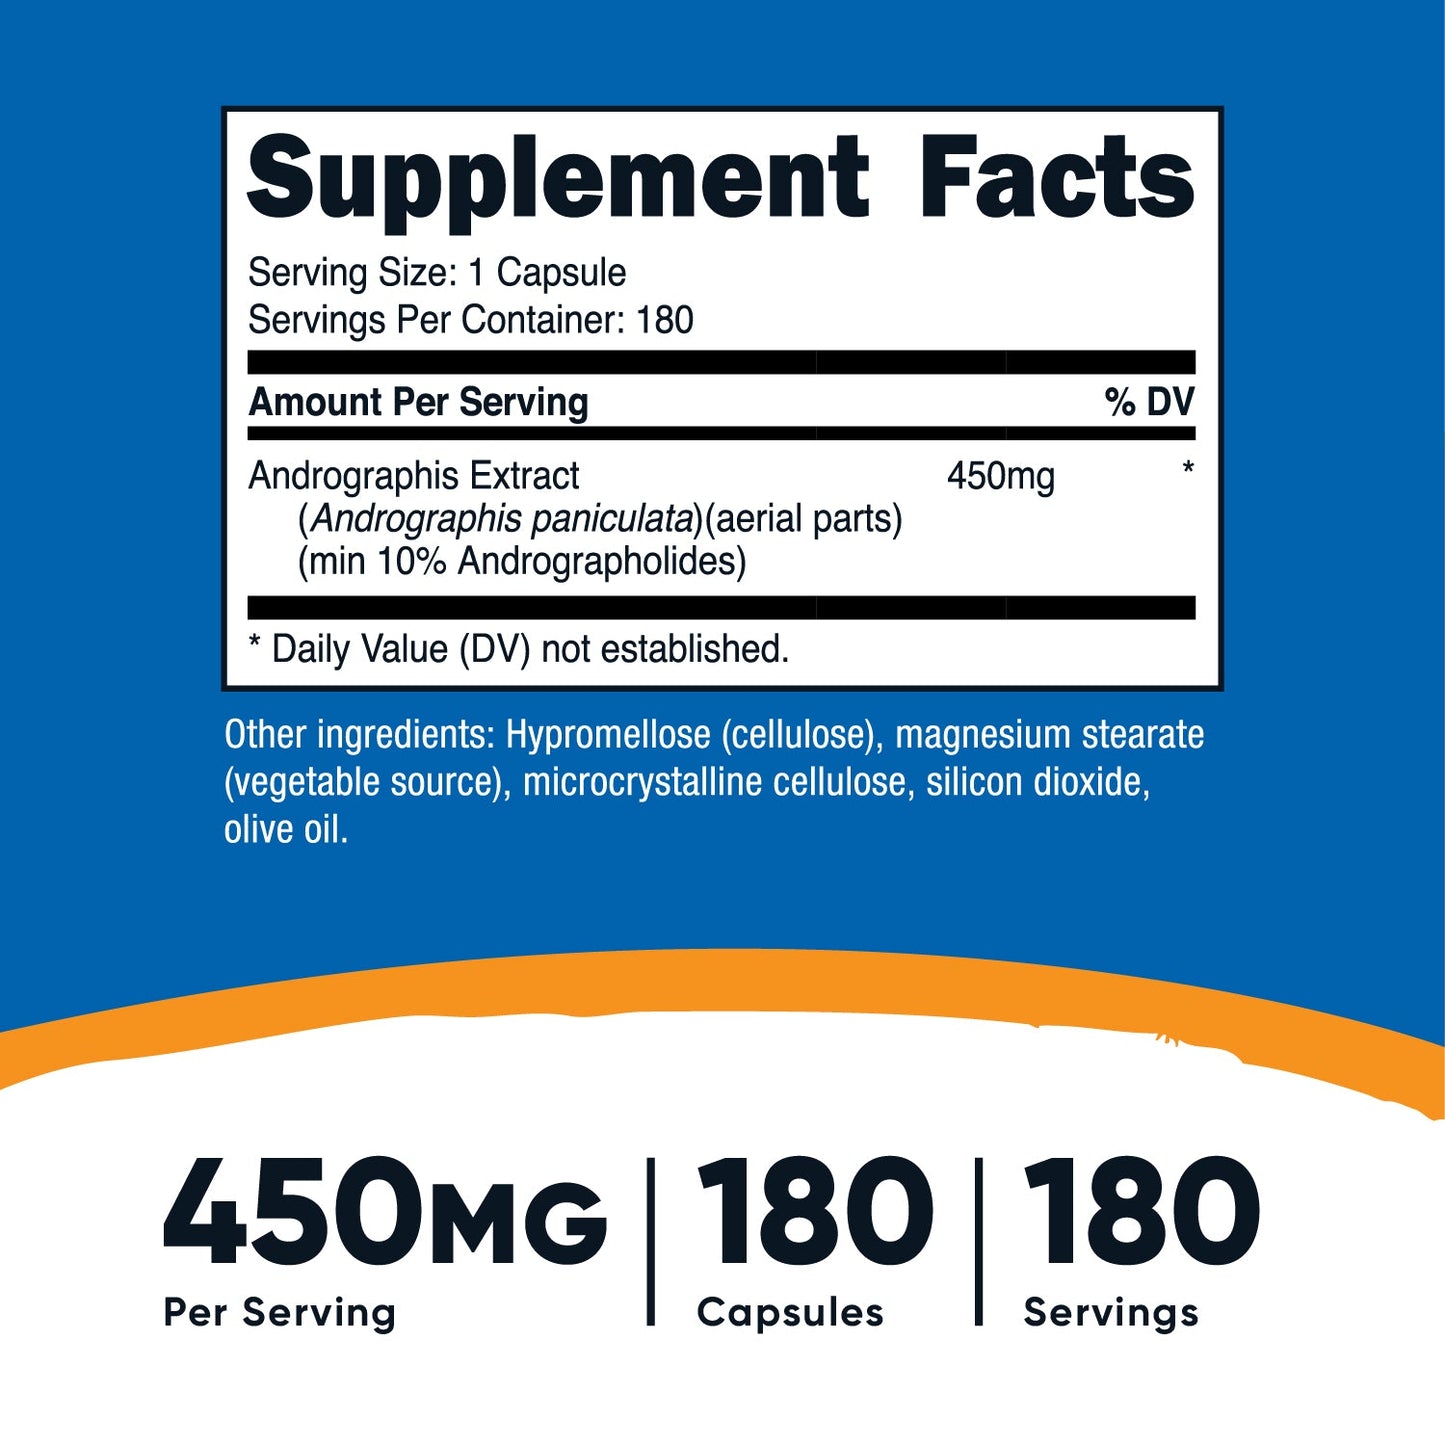 Nutricost Andrographis Extract Capsules